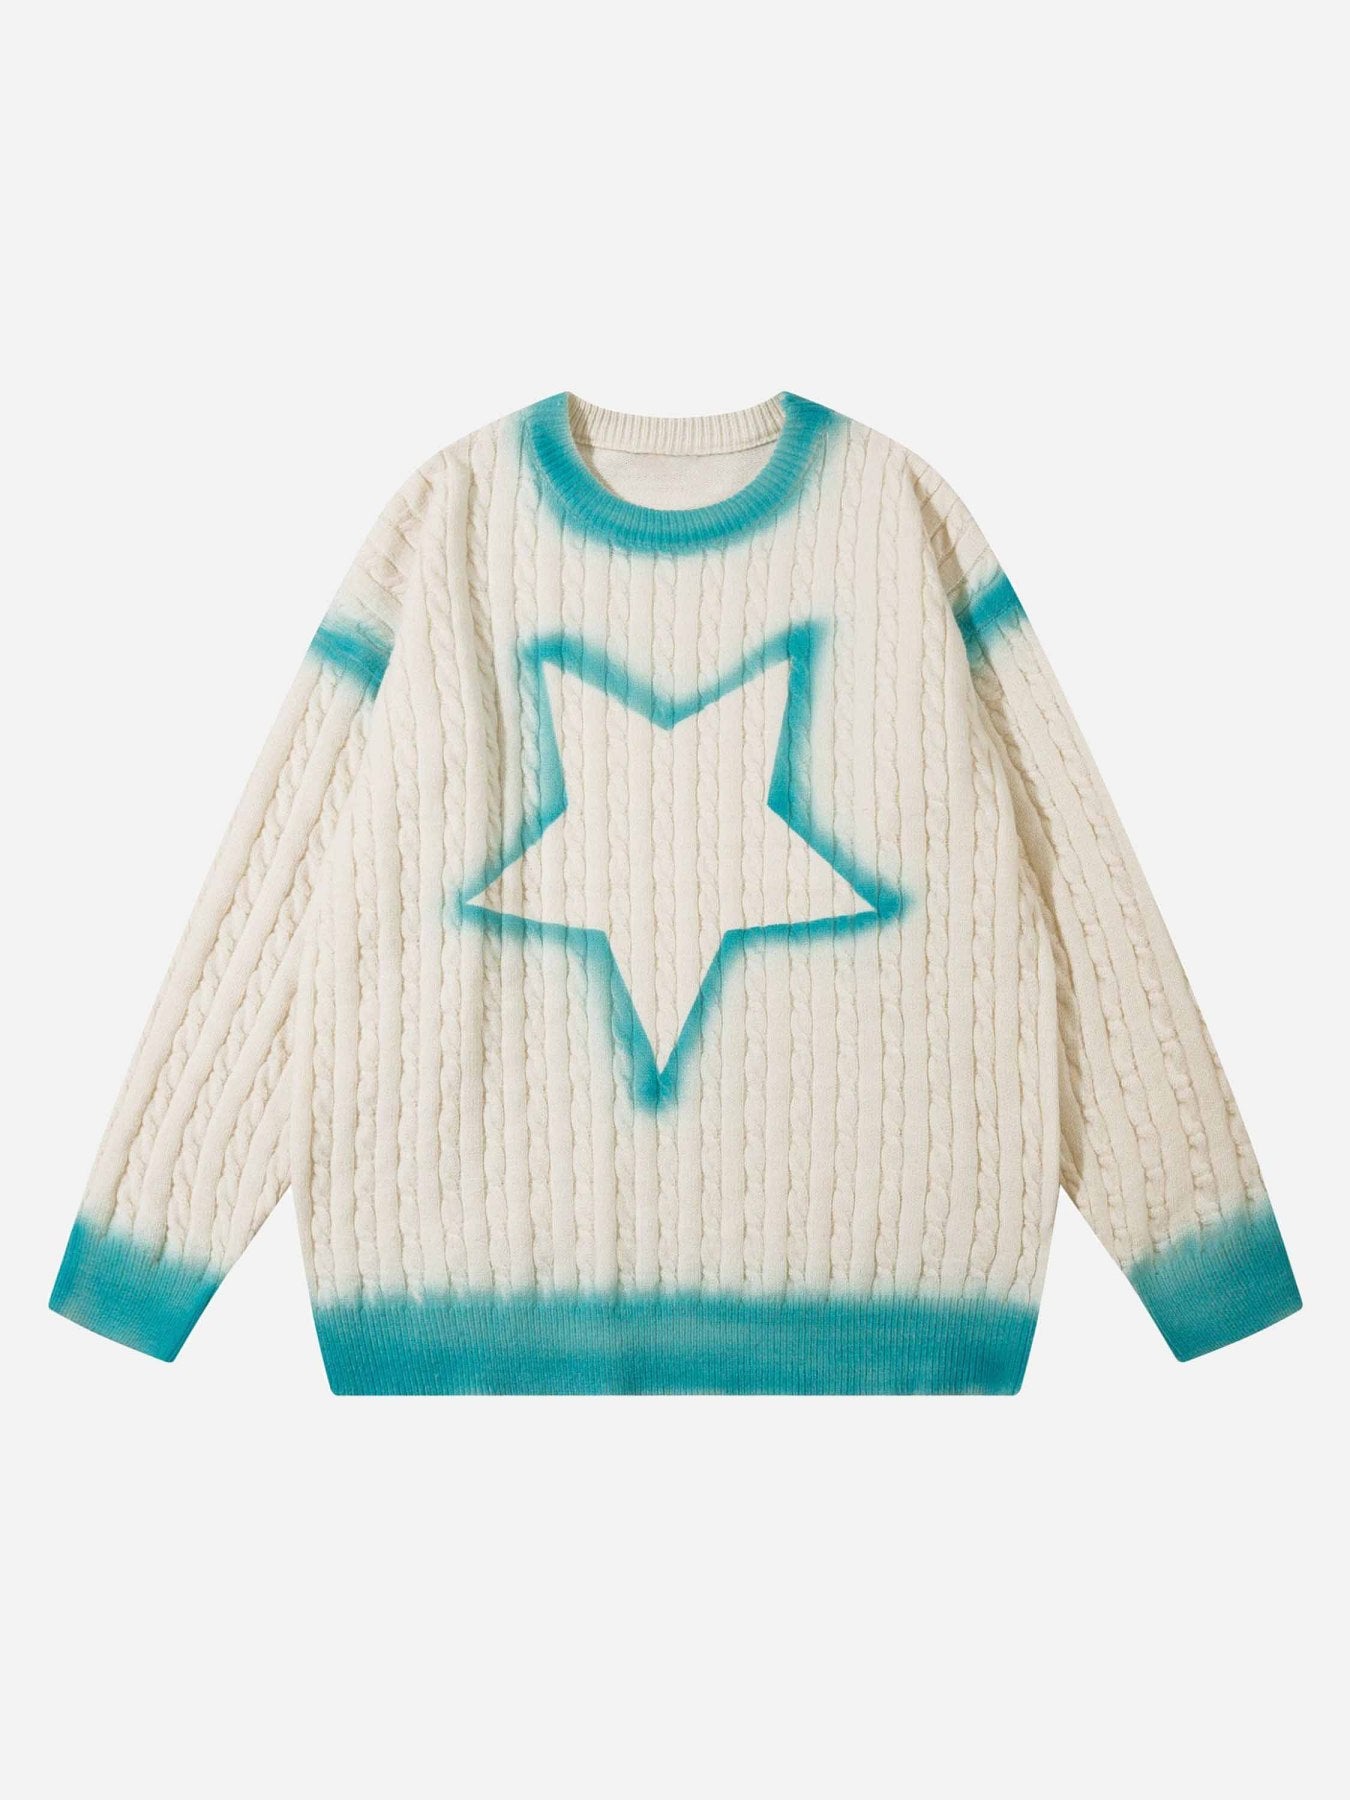 The Supermade Star Loose Sweater